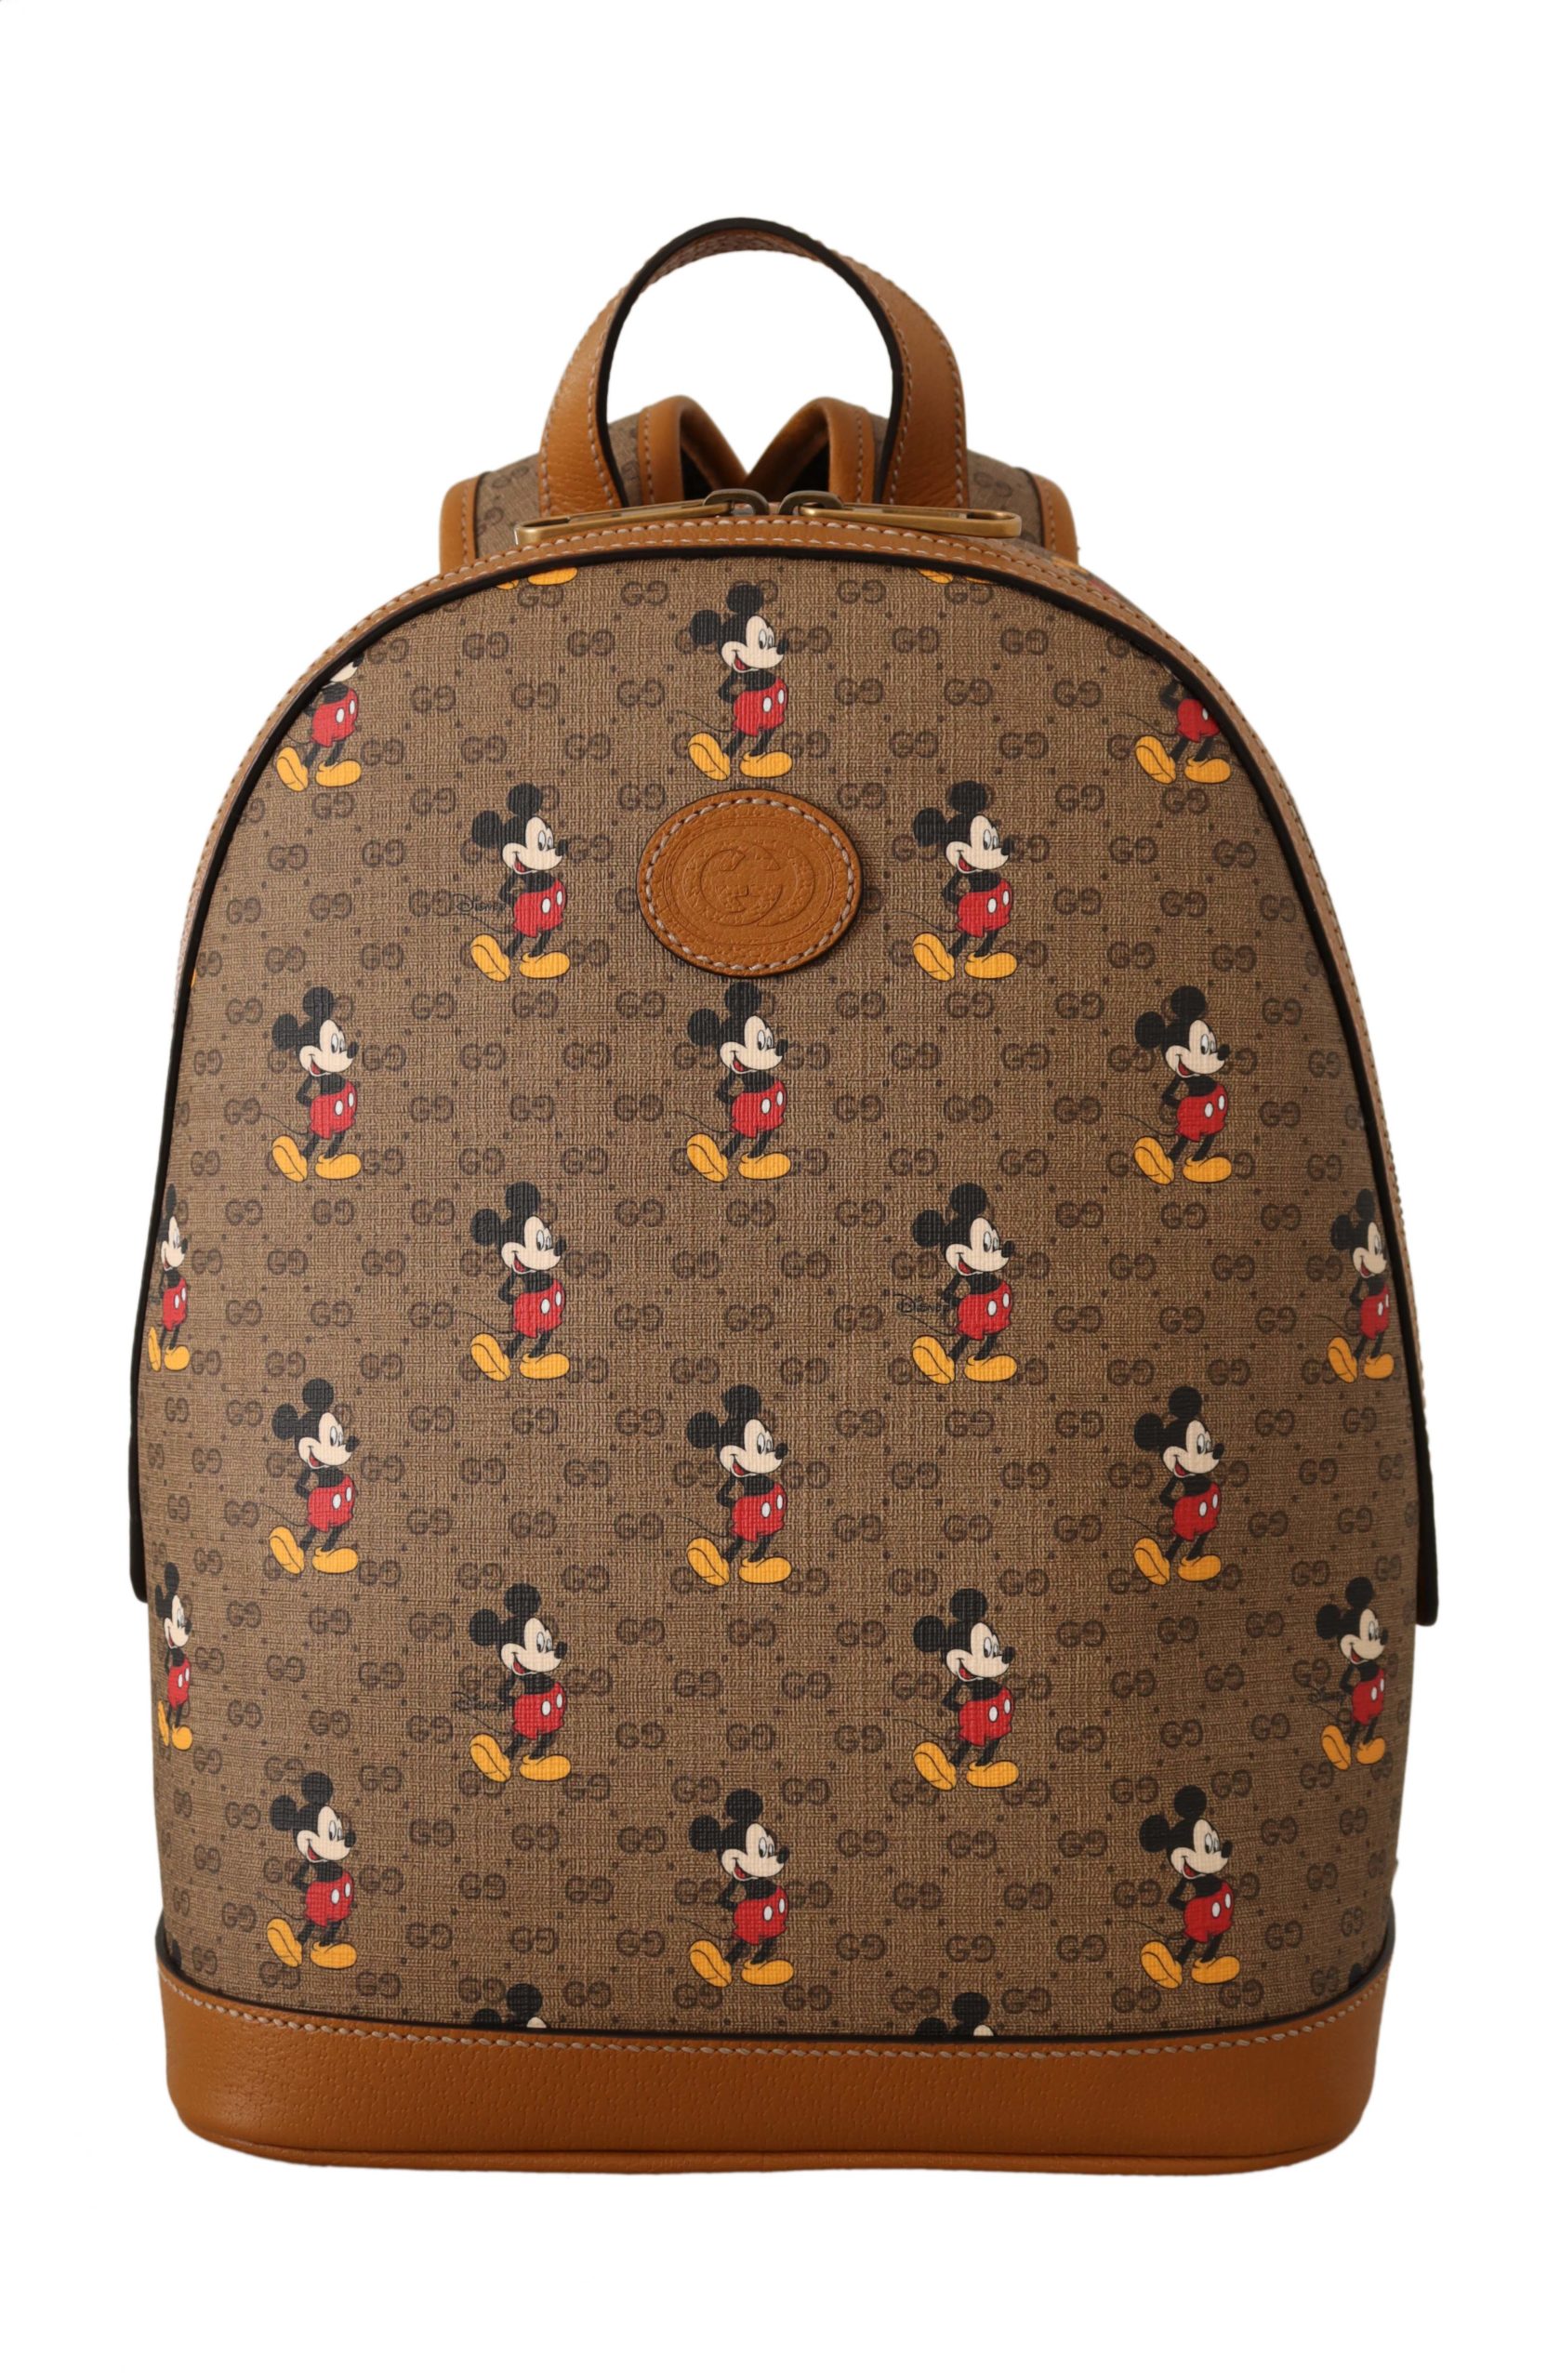 Blind faith leather Ass Gucci GUCCI x Disney Collabo Mickey Mouse Bag Pack • Fashion Brands Outlet